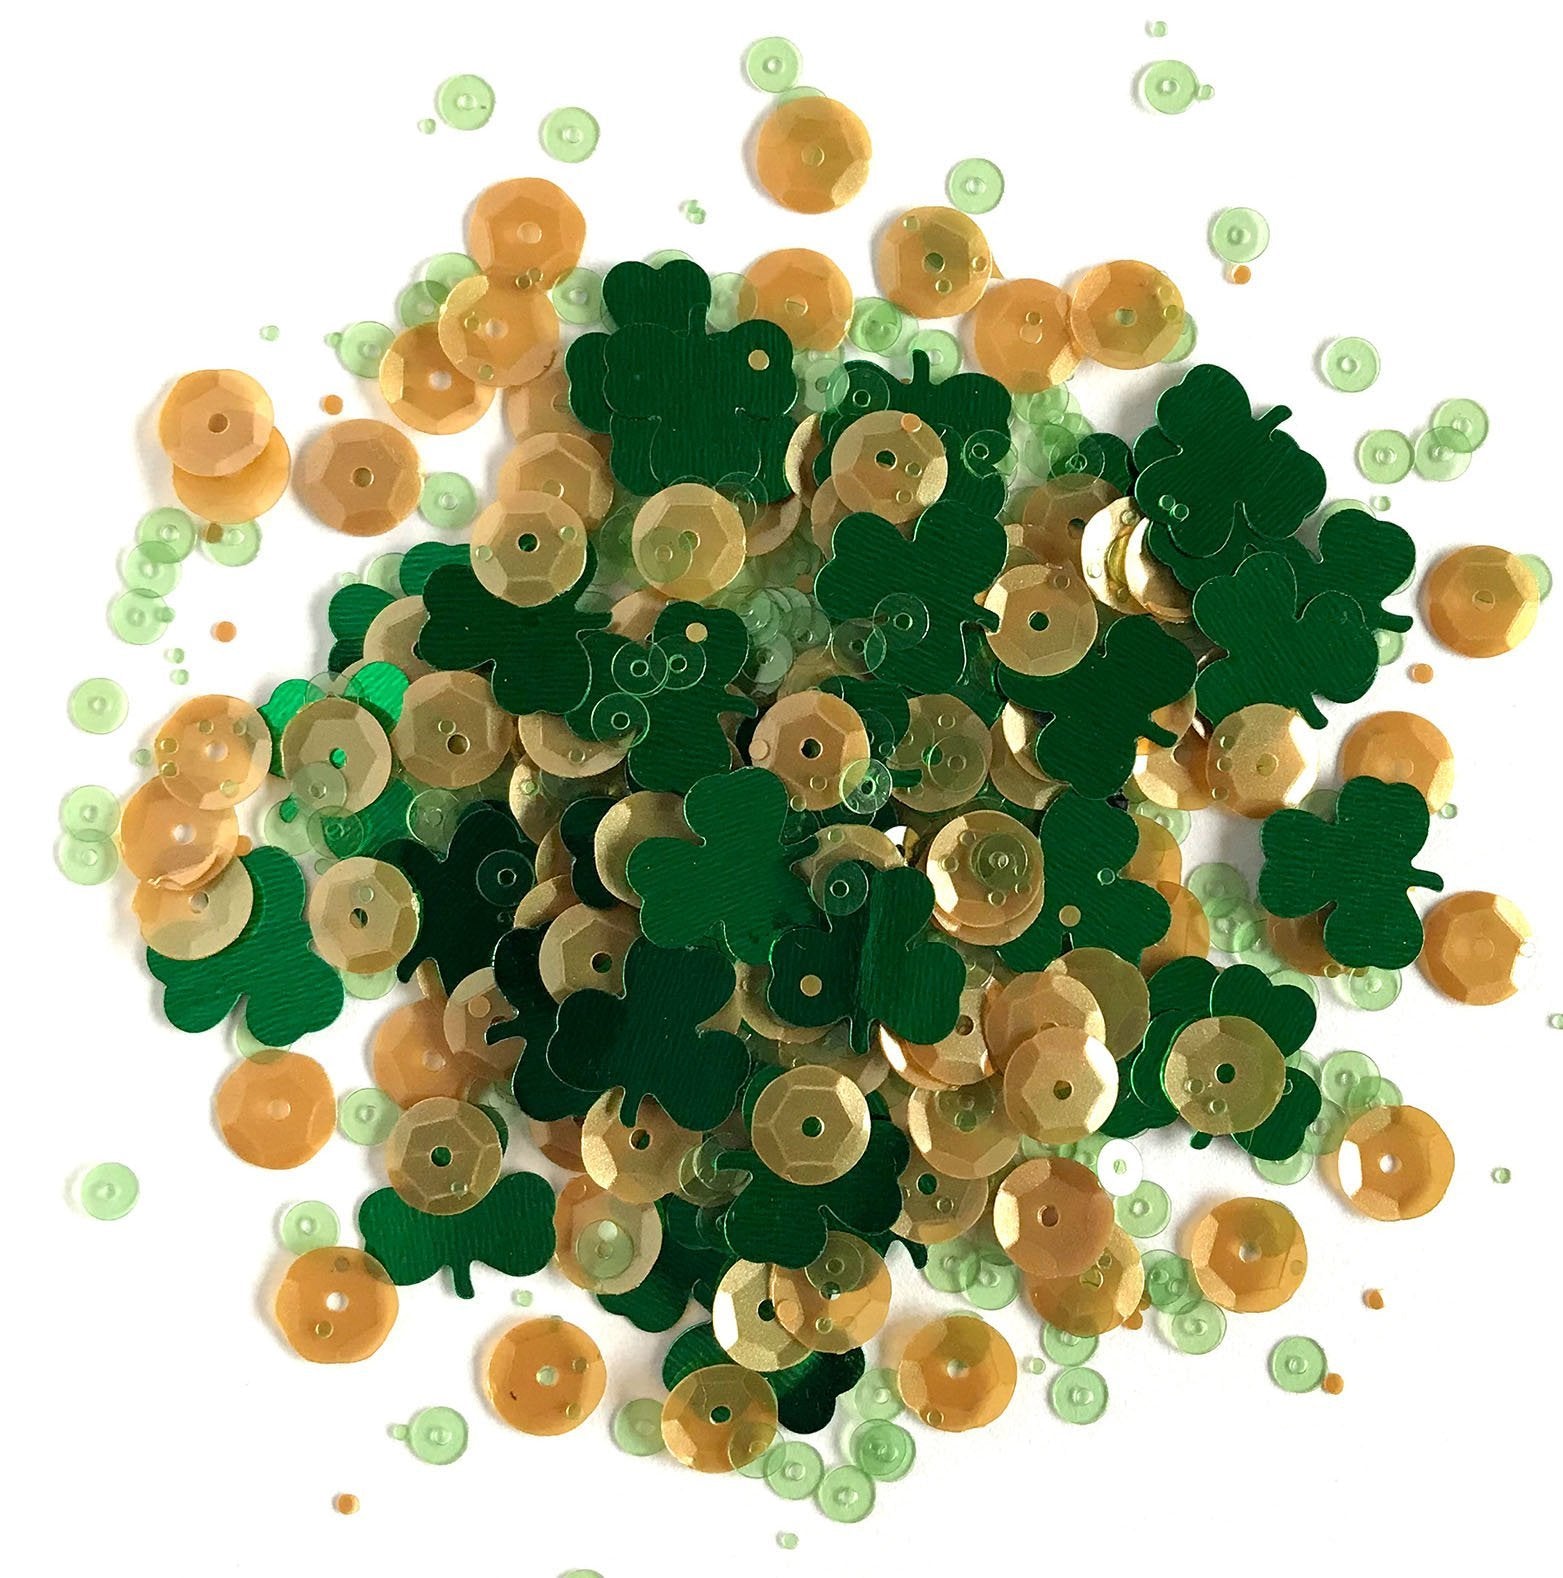 Leprechaun's Luck - PS758 - Buttons Galore and More